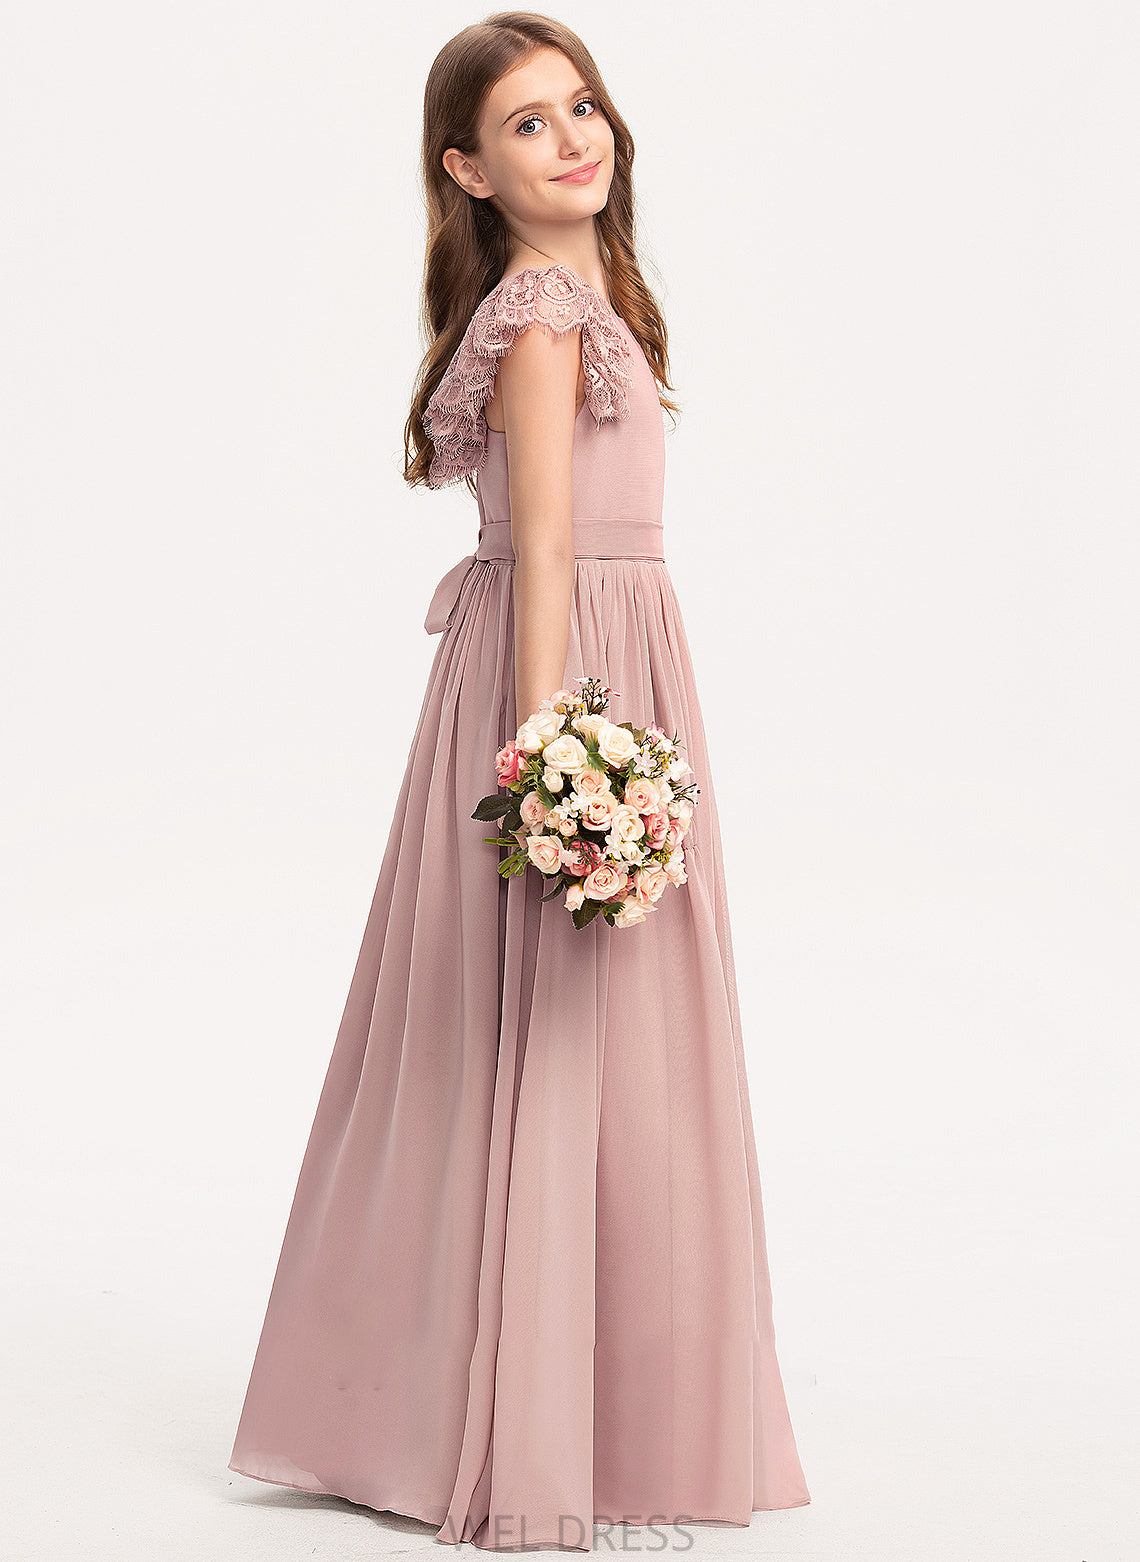 Chiffon Bow(s) Neck Junior Bridesmaid Dresses Floor-Length With A-Line Lace Miracle Scoop